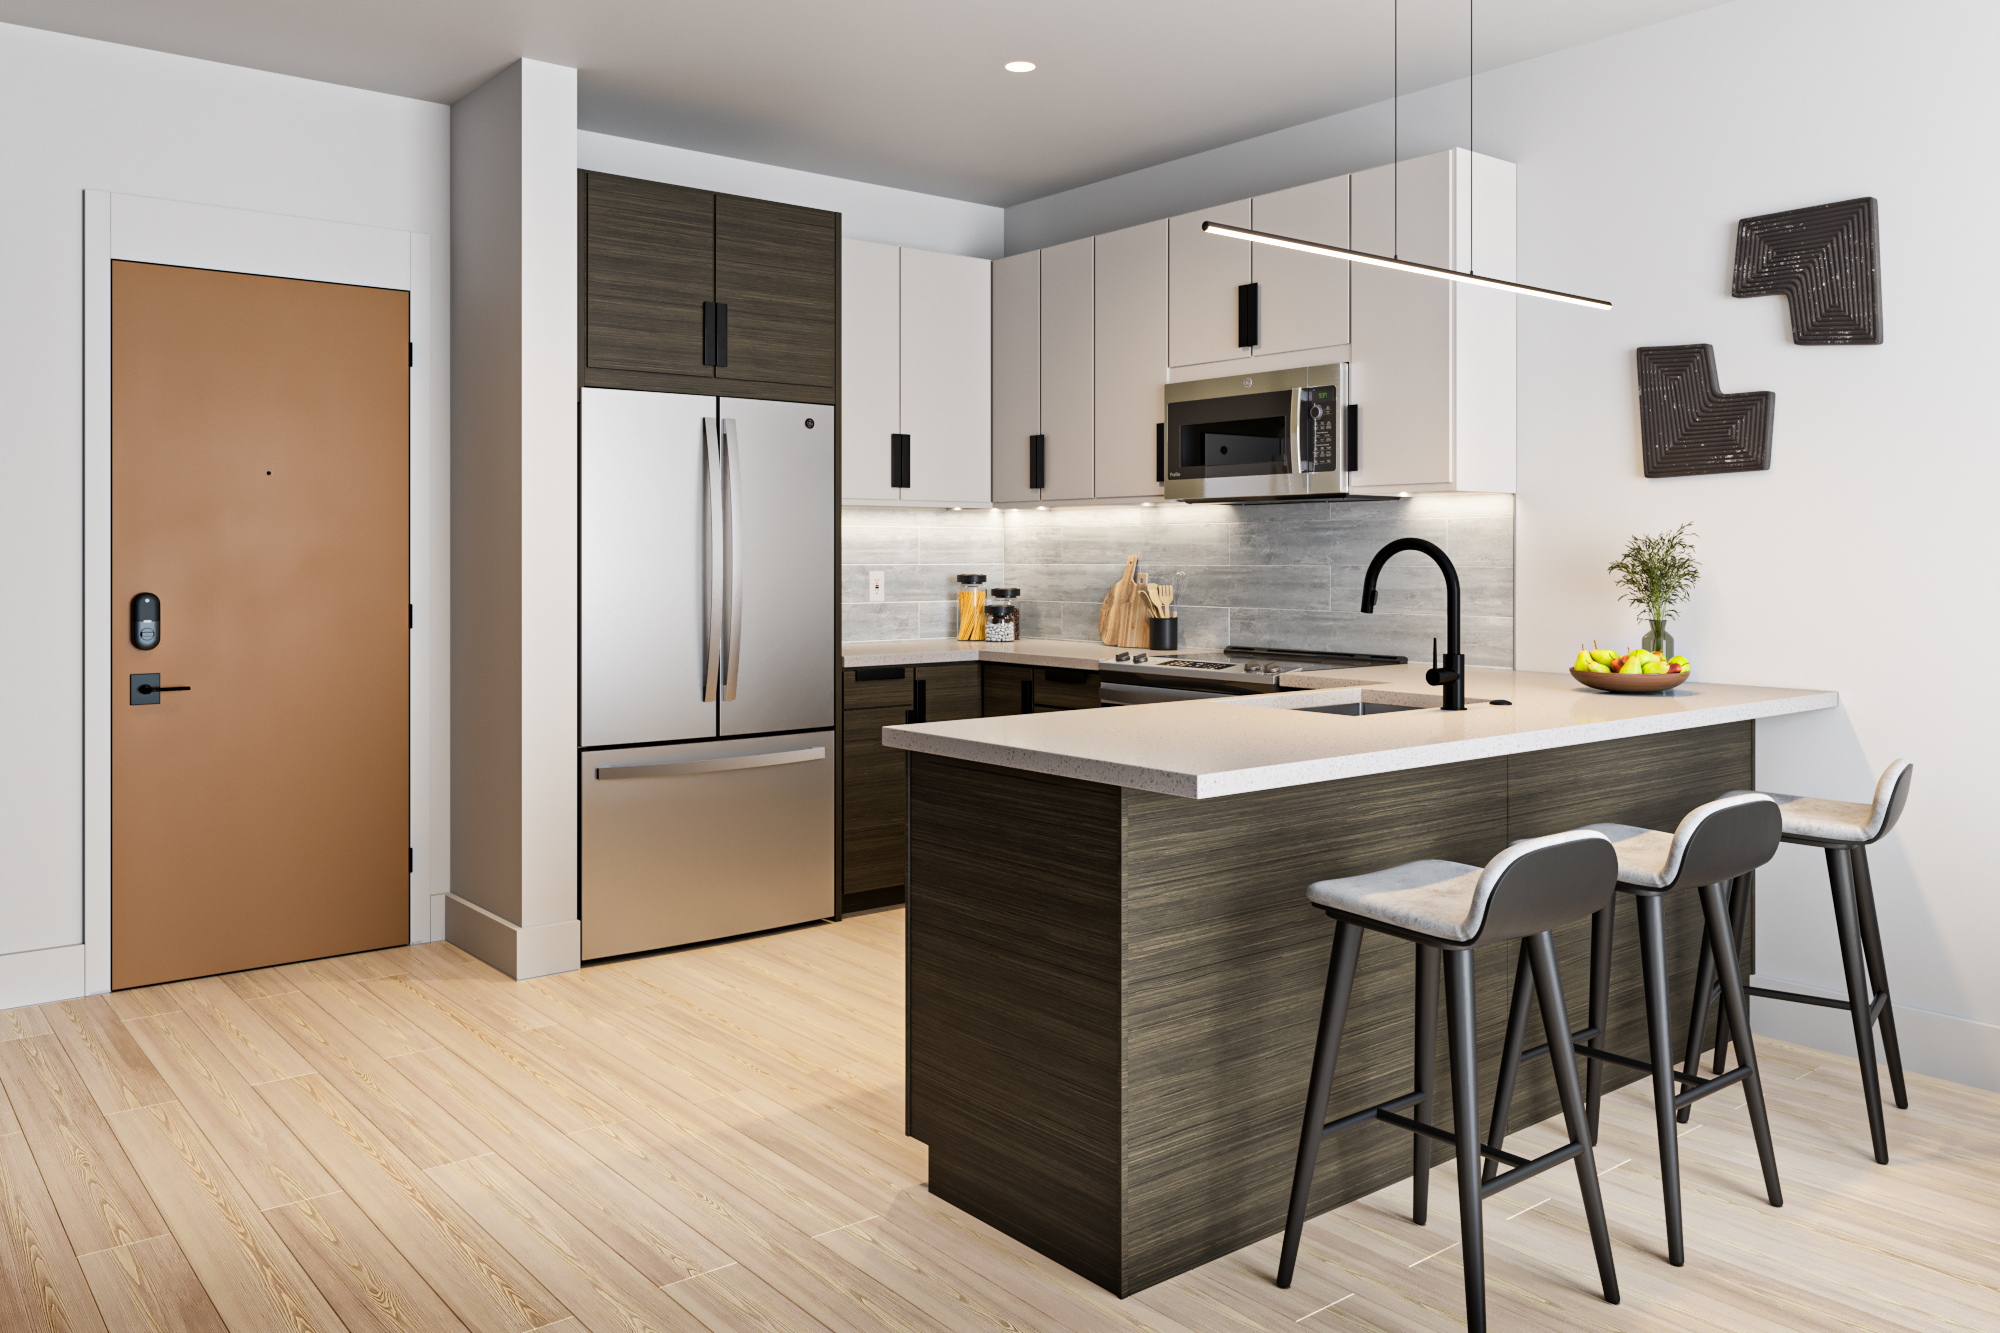 Rendering of a kitchen in a Glassworks apartment